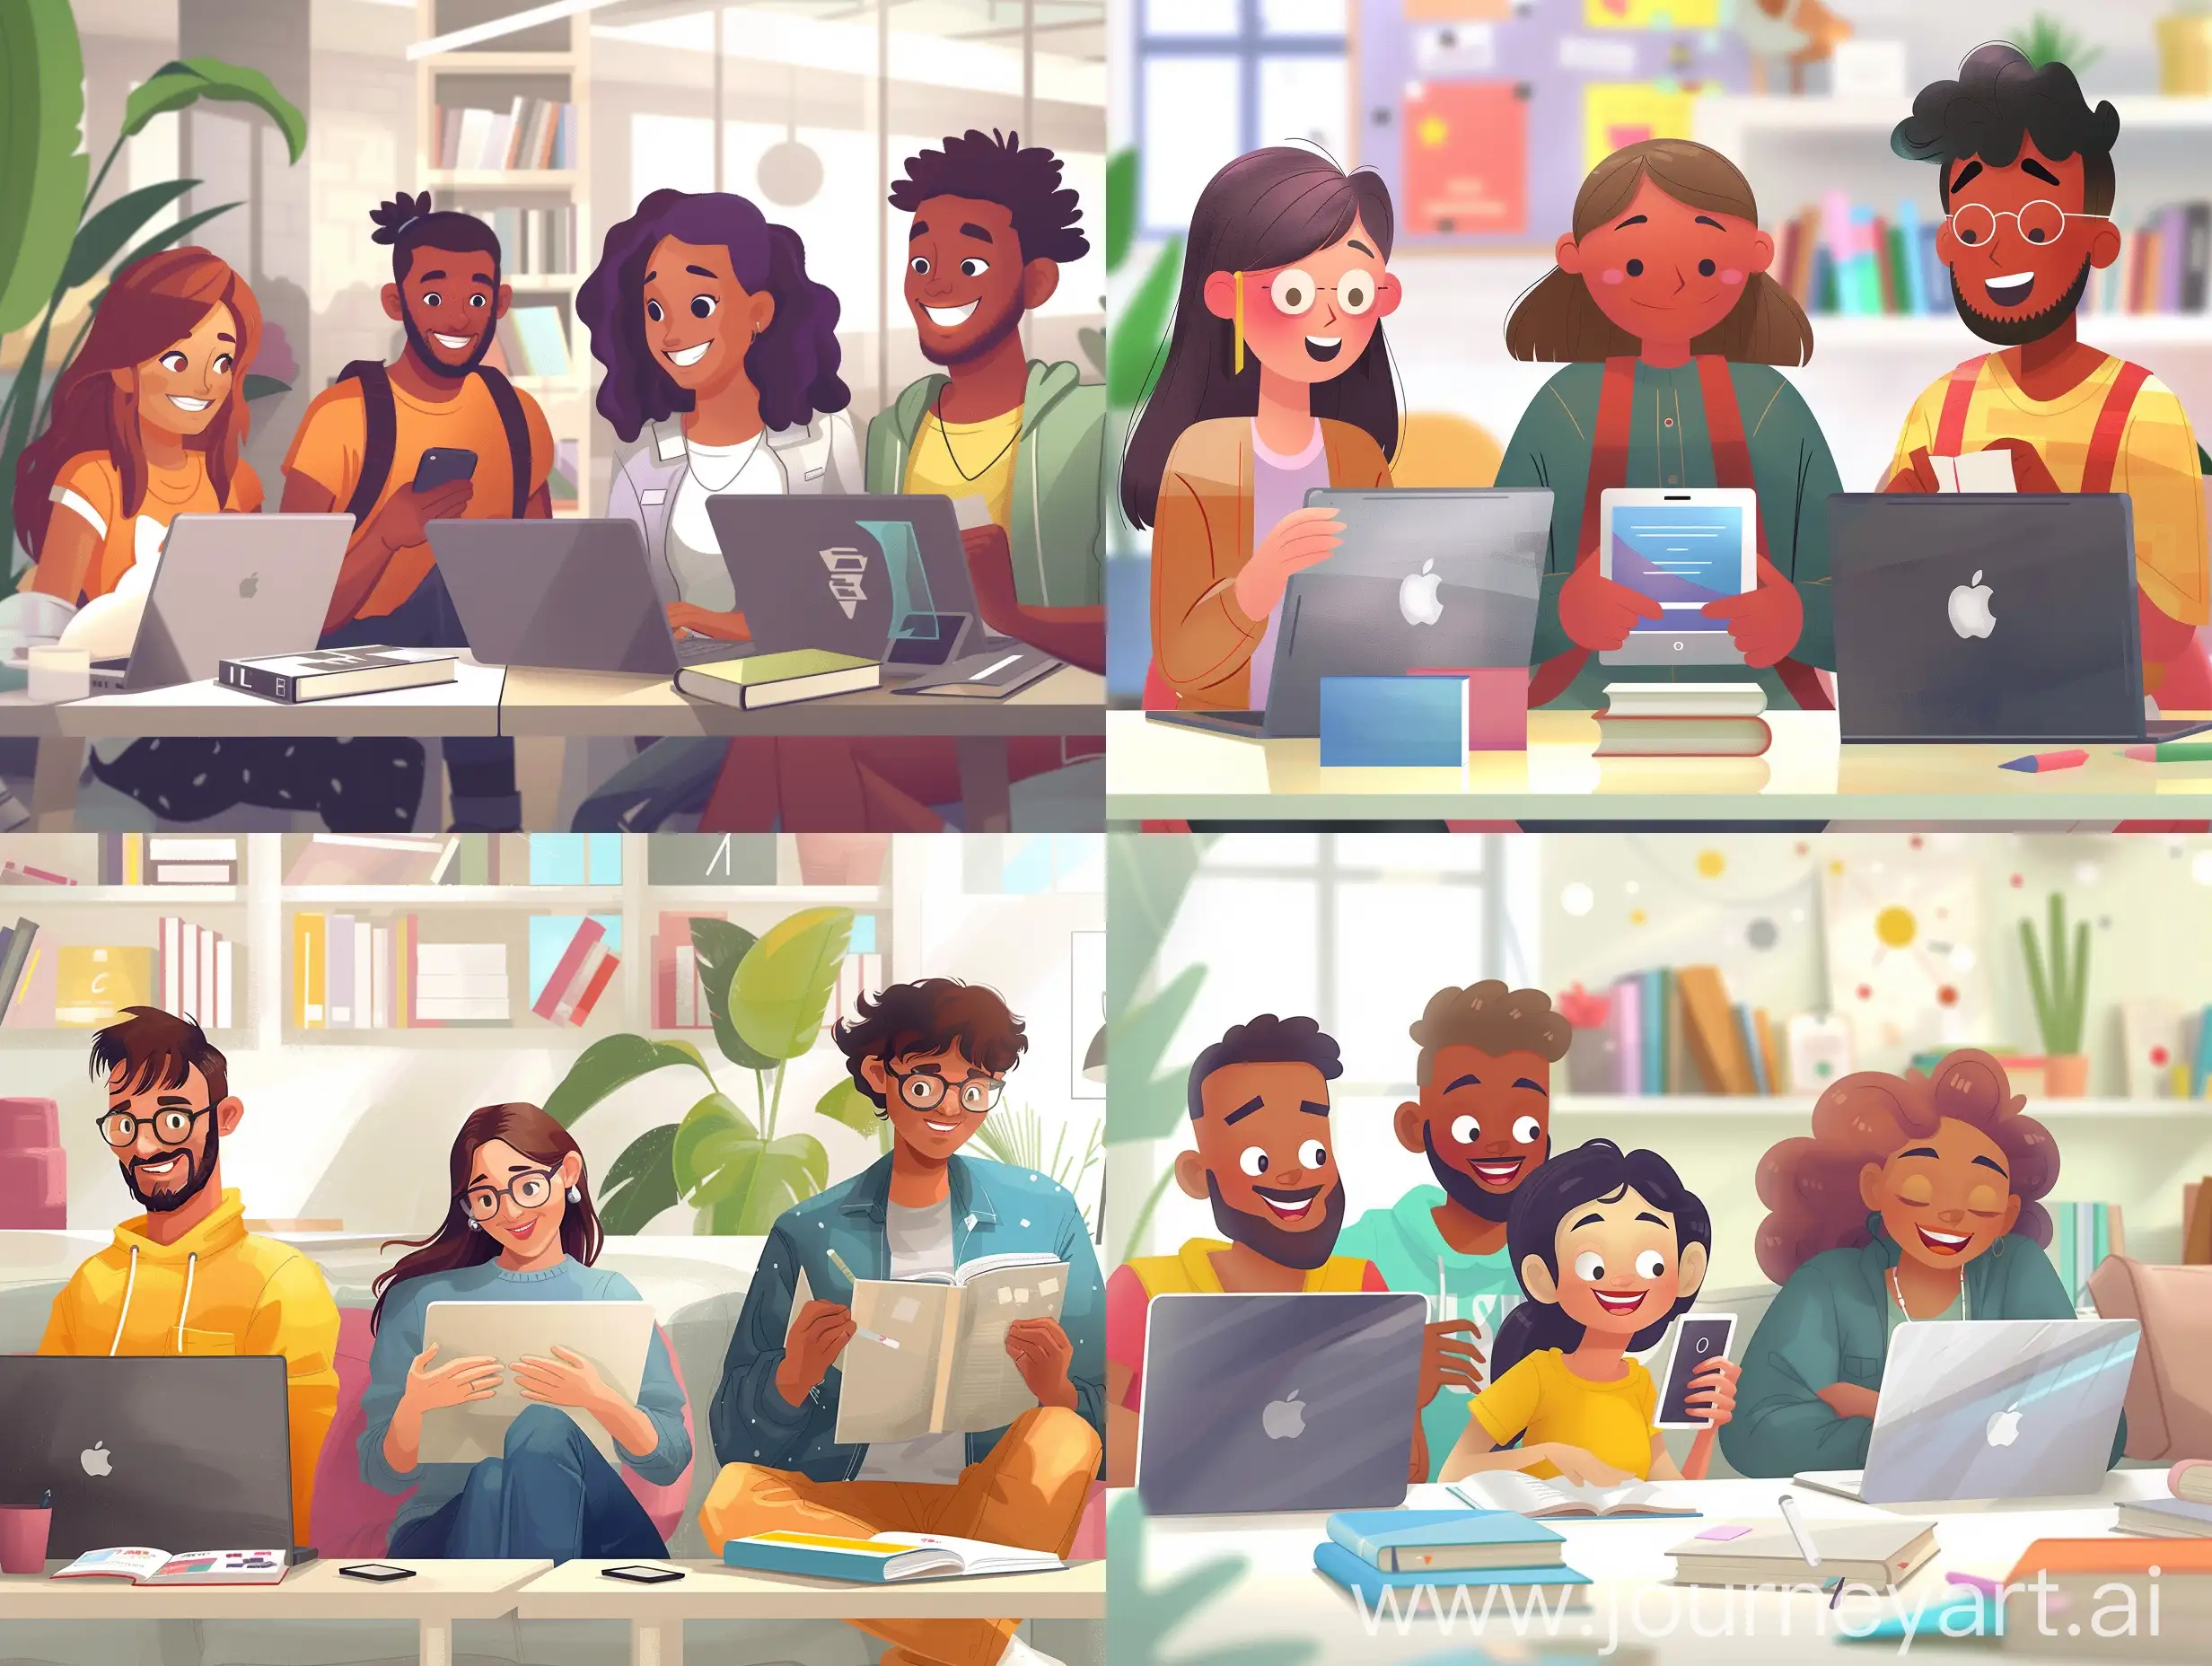 Create a modern, stylish illustration in either 2D or 3D. The scene should depict a diverse group of 3 to 4 people engaged in learning activities using different media. Each person should be interacting with different learning materials such as a laptop, tablet, smartphone, and a book. They should look happy and excited, reflecting a sense of enjoyment and fulfillment from this new way of learning. The setting should be bright and welcoming, with contemporary design elements that give a sense of innovation and creativity. The overall atmosphere should be dynamic and inspiring, capturing the essence of a community learning together.

Style References:

Clean lines and vibrant colors
Modern, minimalist background with subtle details
Characters with expressive faces and casual, trendy clothing
A blend of realism and artistic stylization
Elements to Include:

A diverse group of 3-4 people (different genders, ethnicities)
Various learning media (laptop, tablet, smartphone, book)
Modern, stylish surroundings (e.g., a cozy room, a sleek library, or an open workspace)
Happy, engaged expressions and body language
Bright, inviting color palette with contemporary design touches